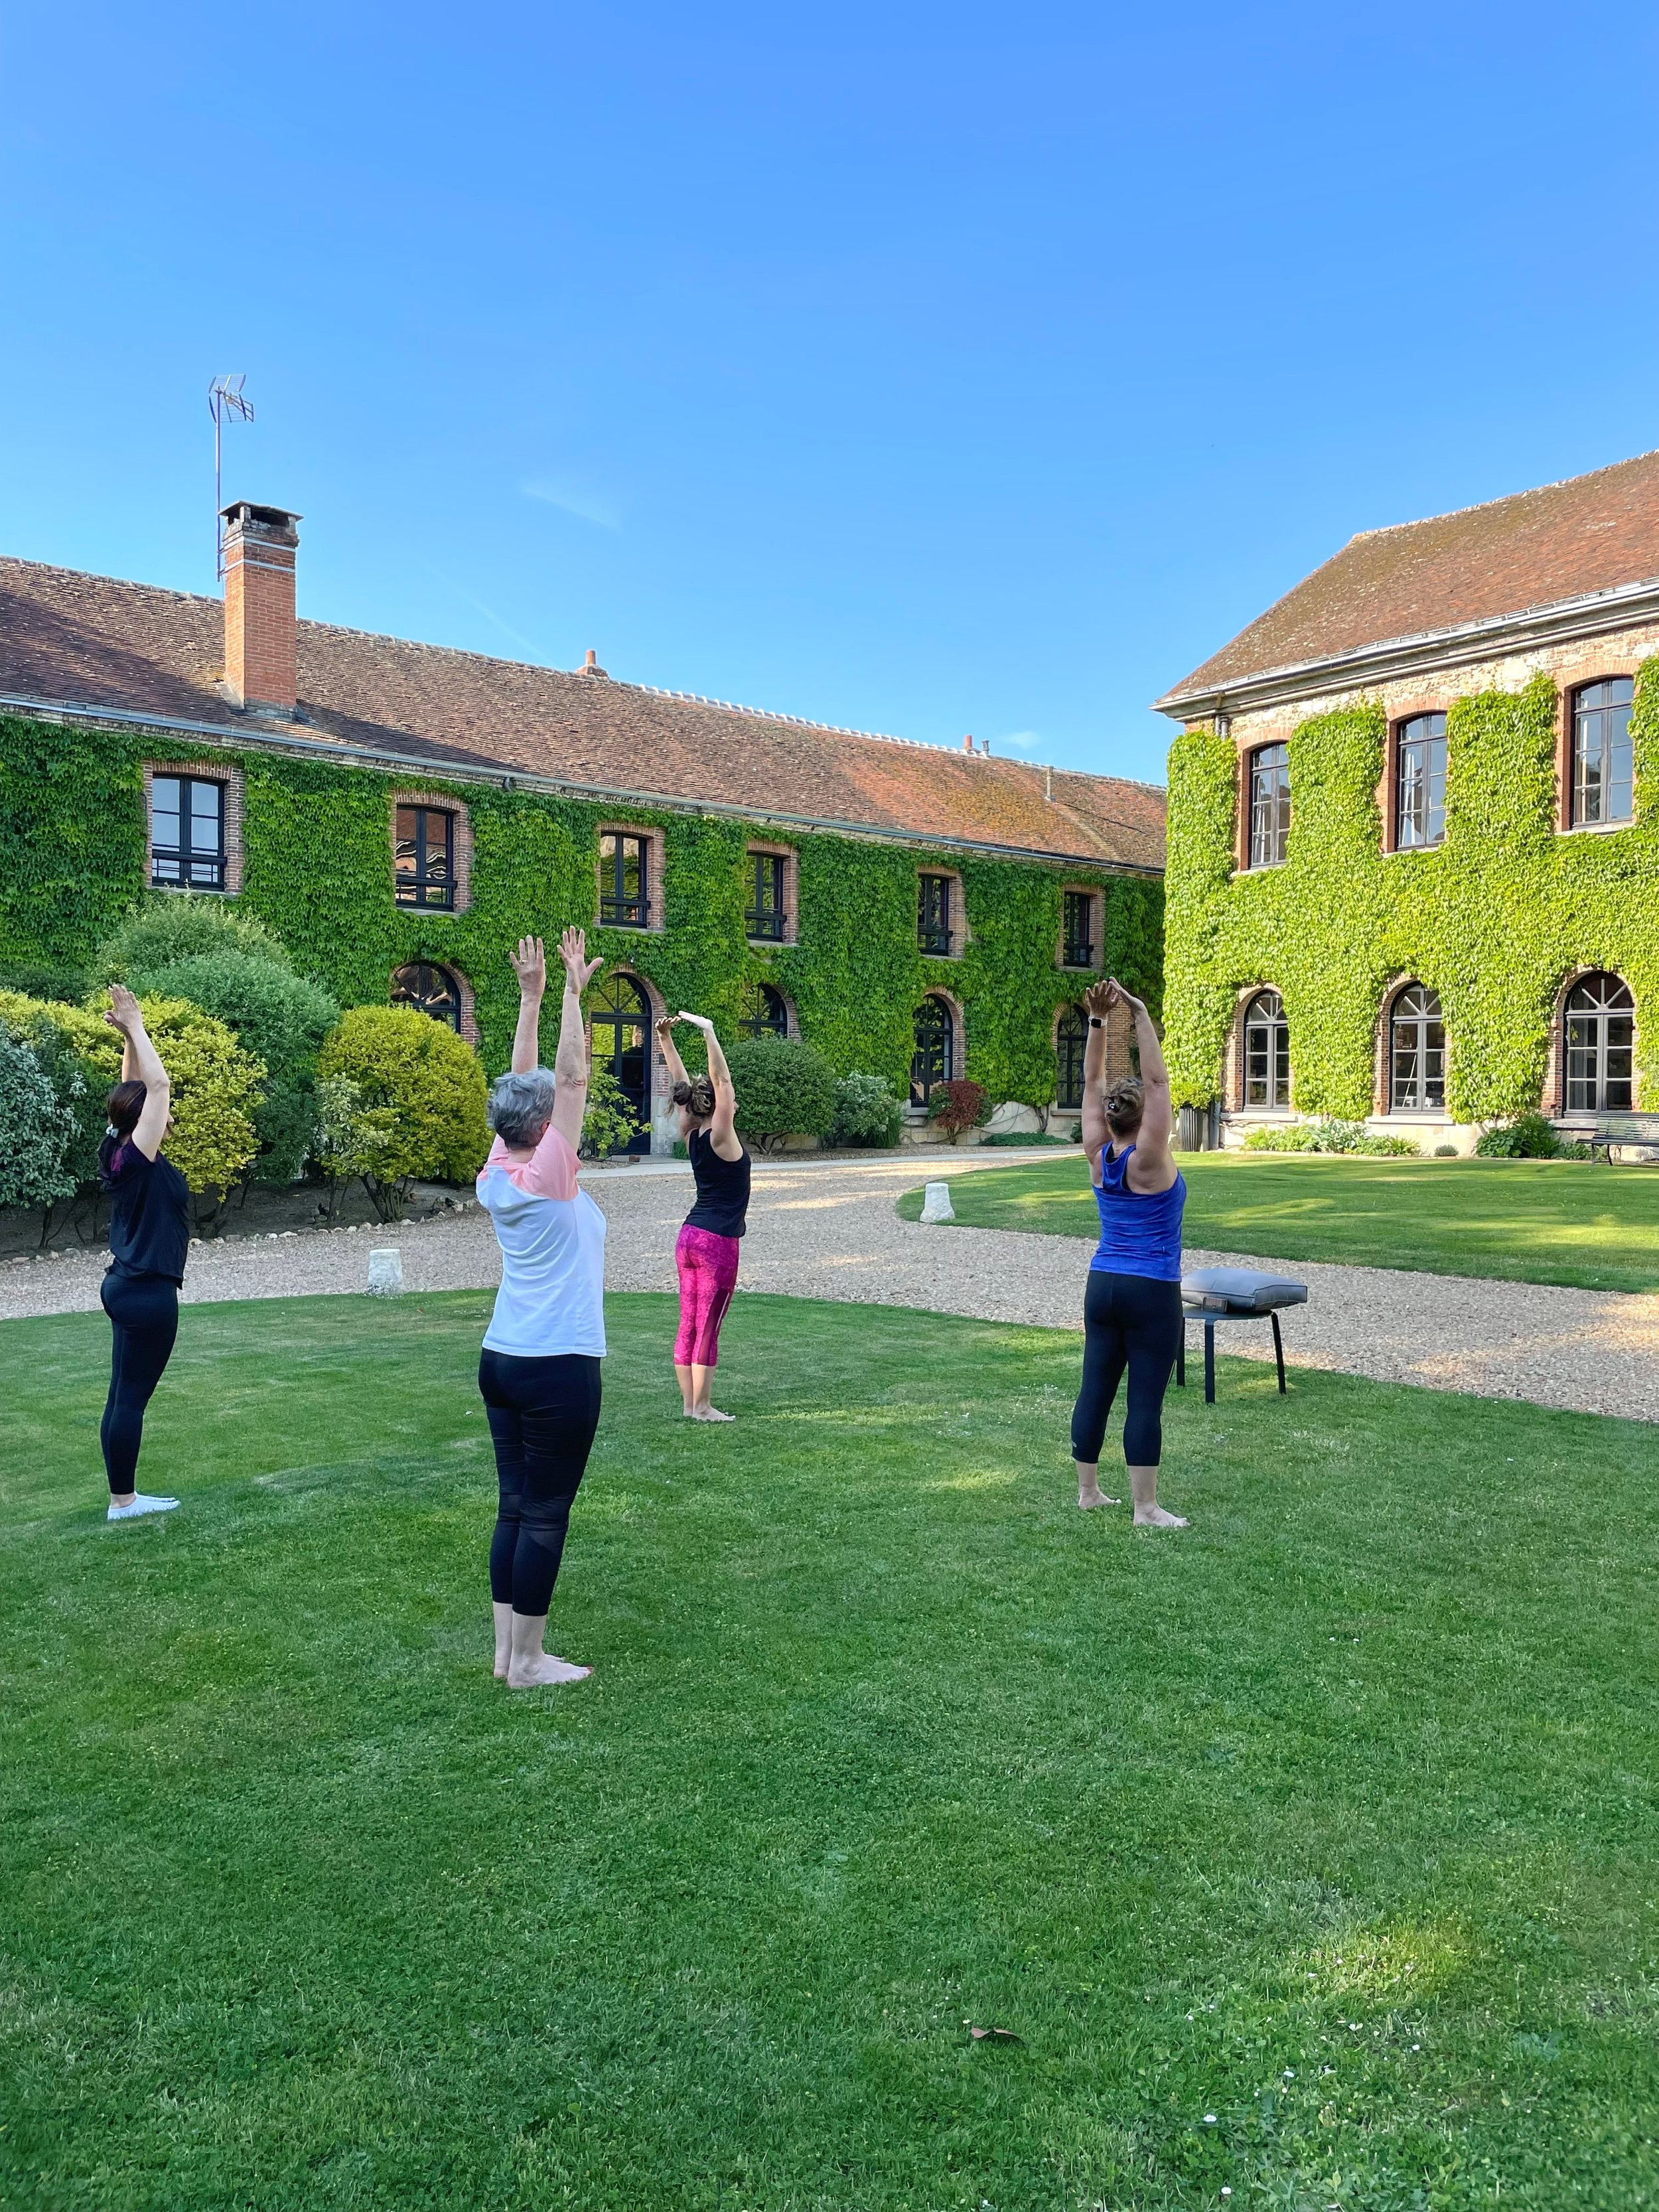 Teambuilding activities in an exceptional country house